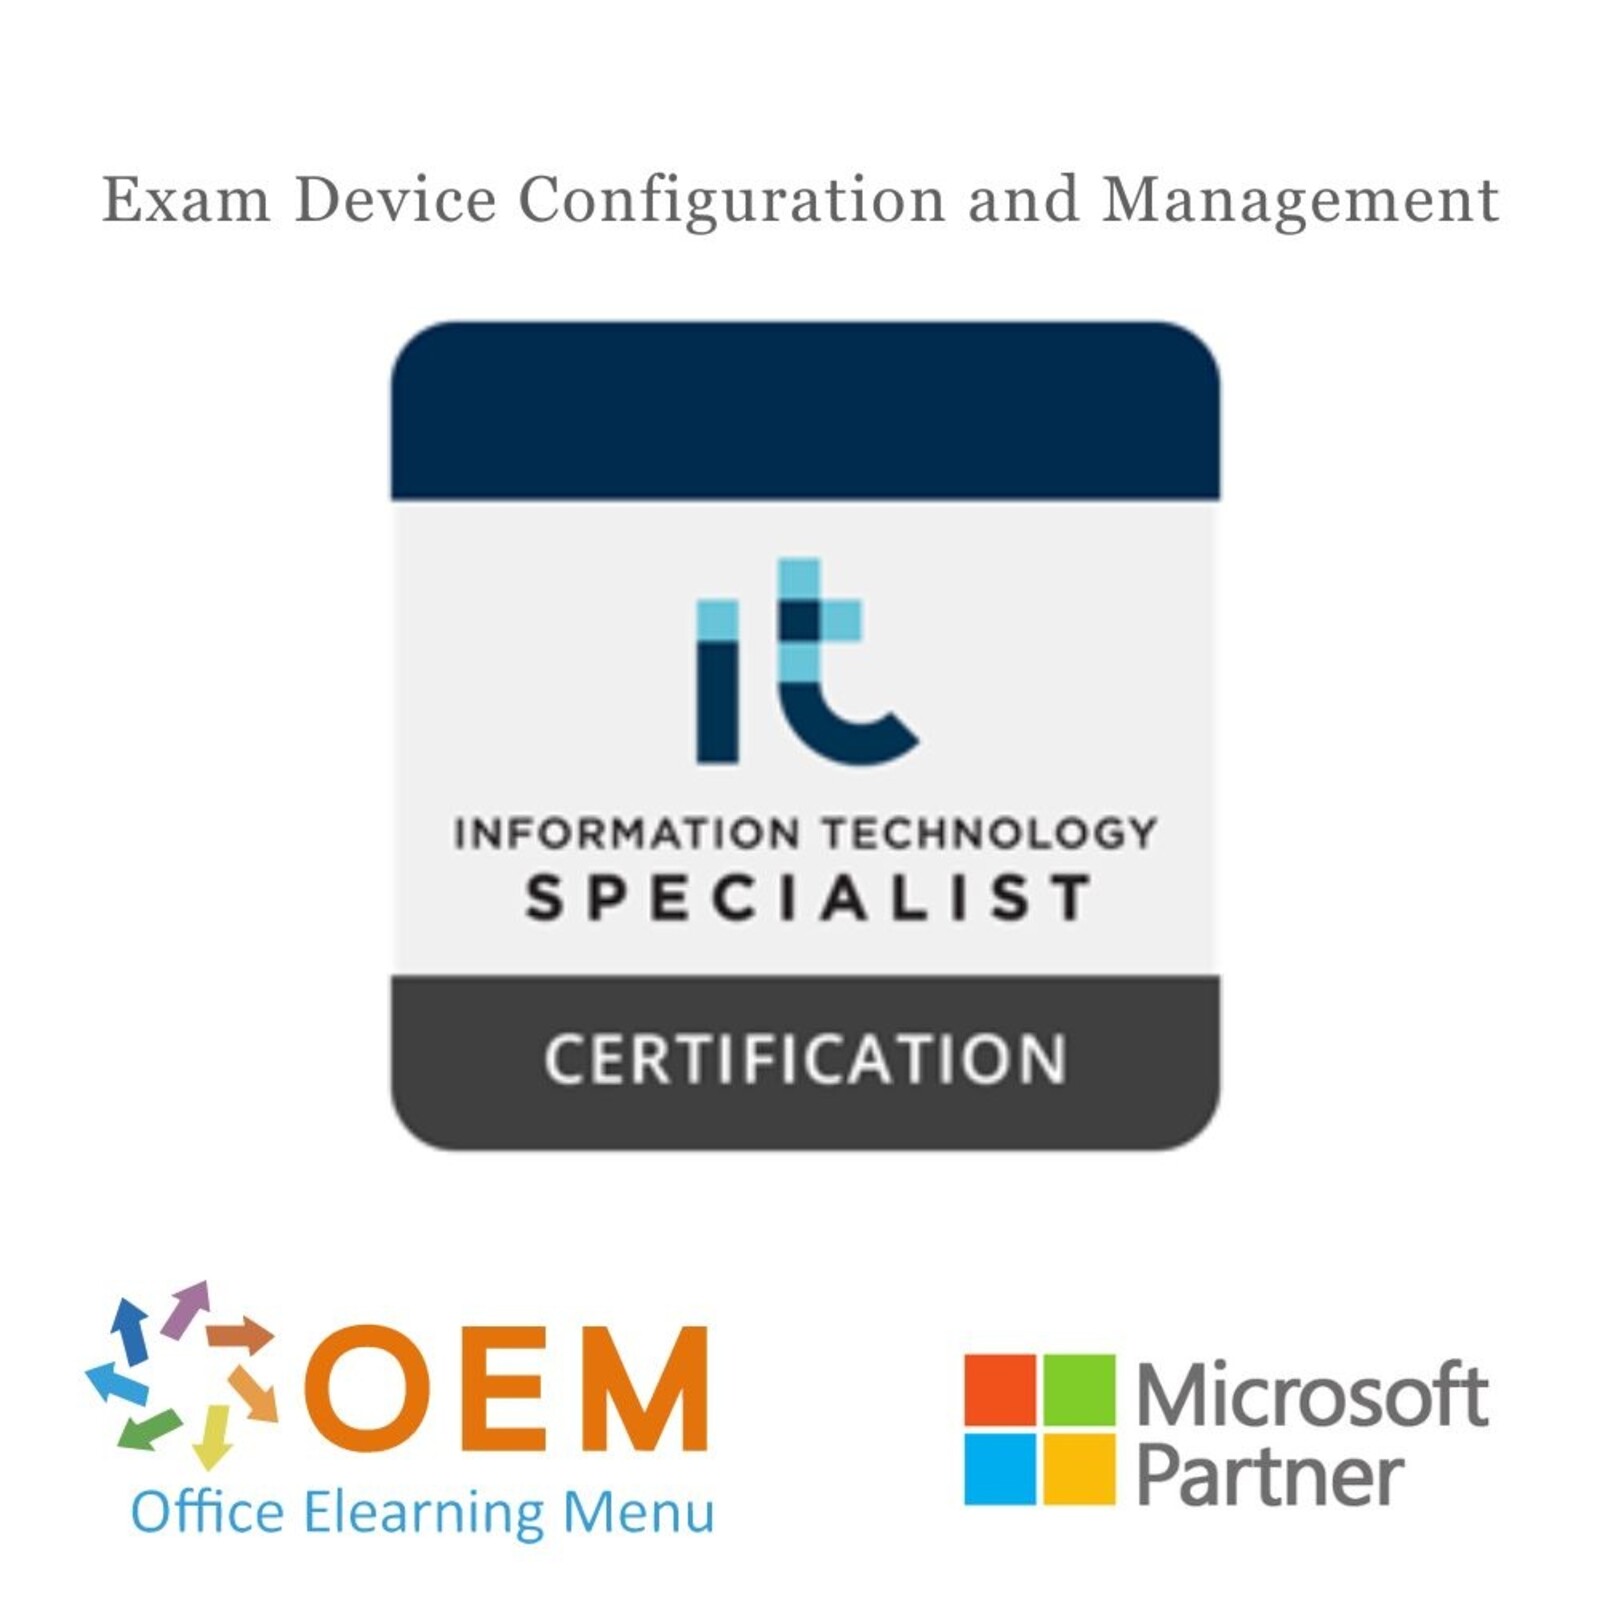 Certiport - Pearson Vue Exam Device Configuration and Management